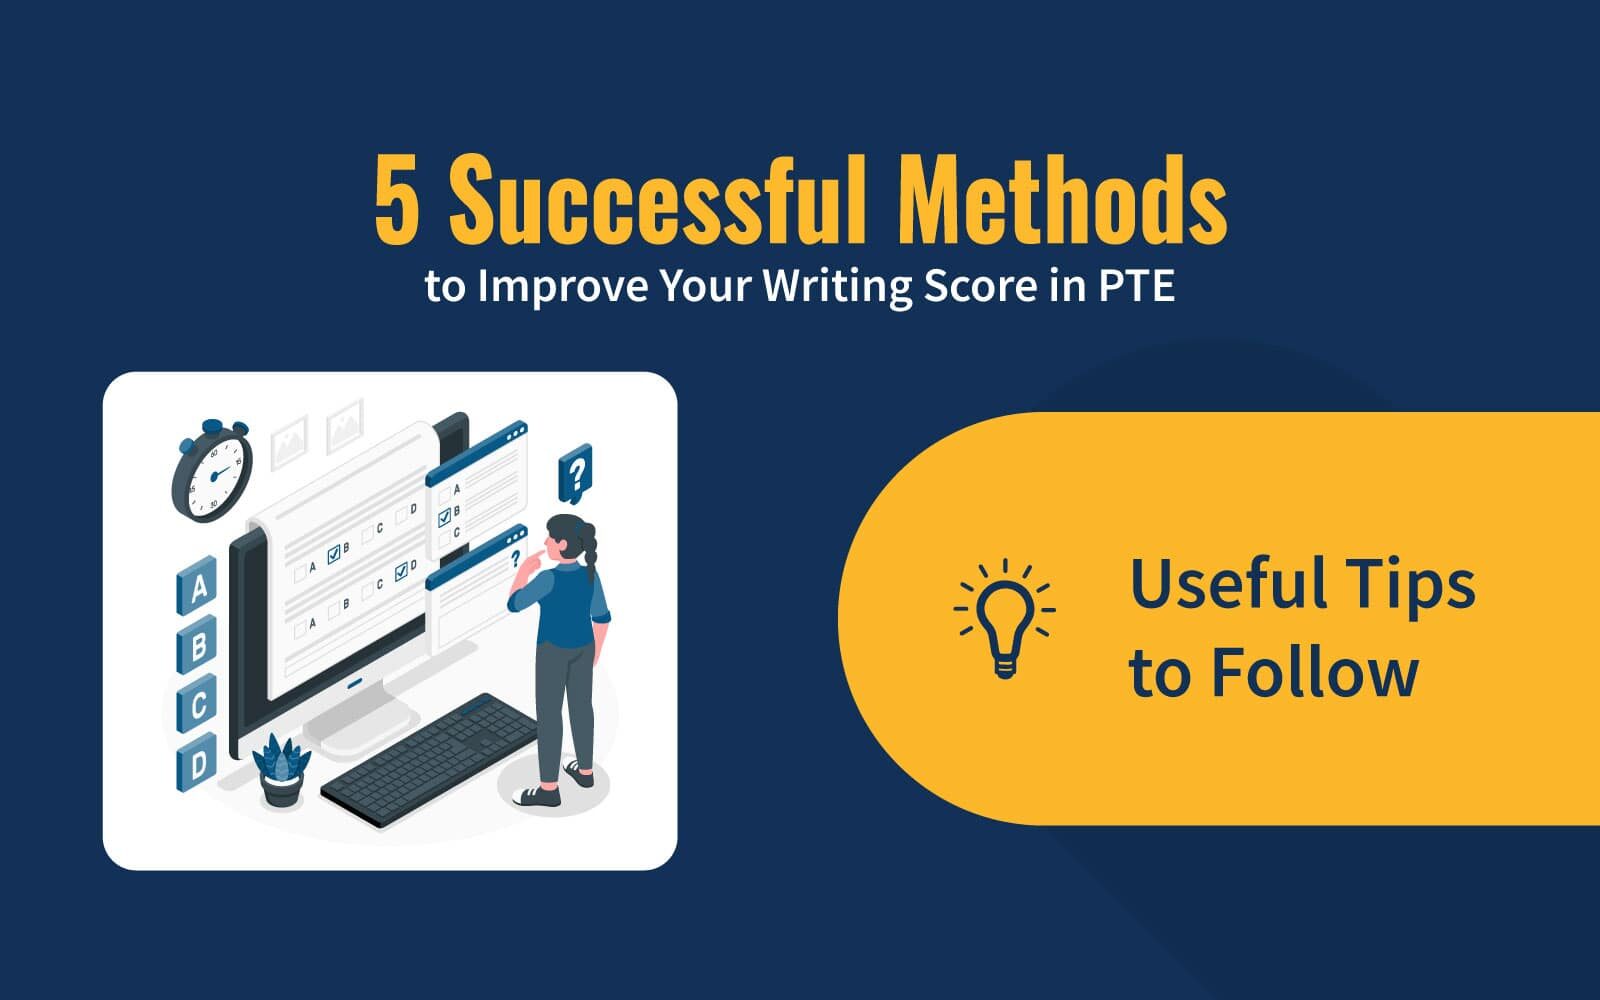 5 Successful Methods to Improve Your Writing Score in PTE